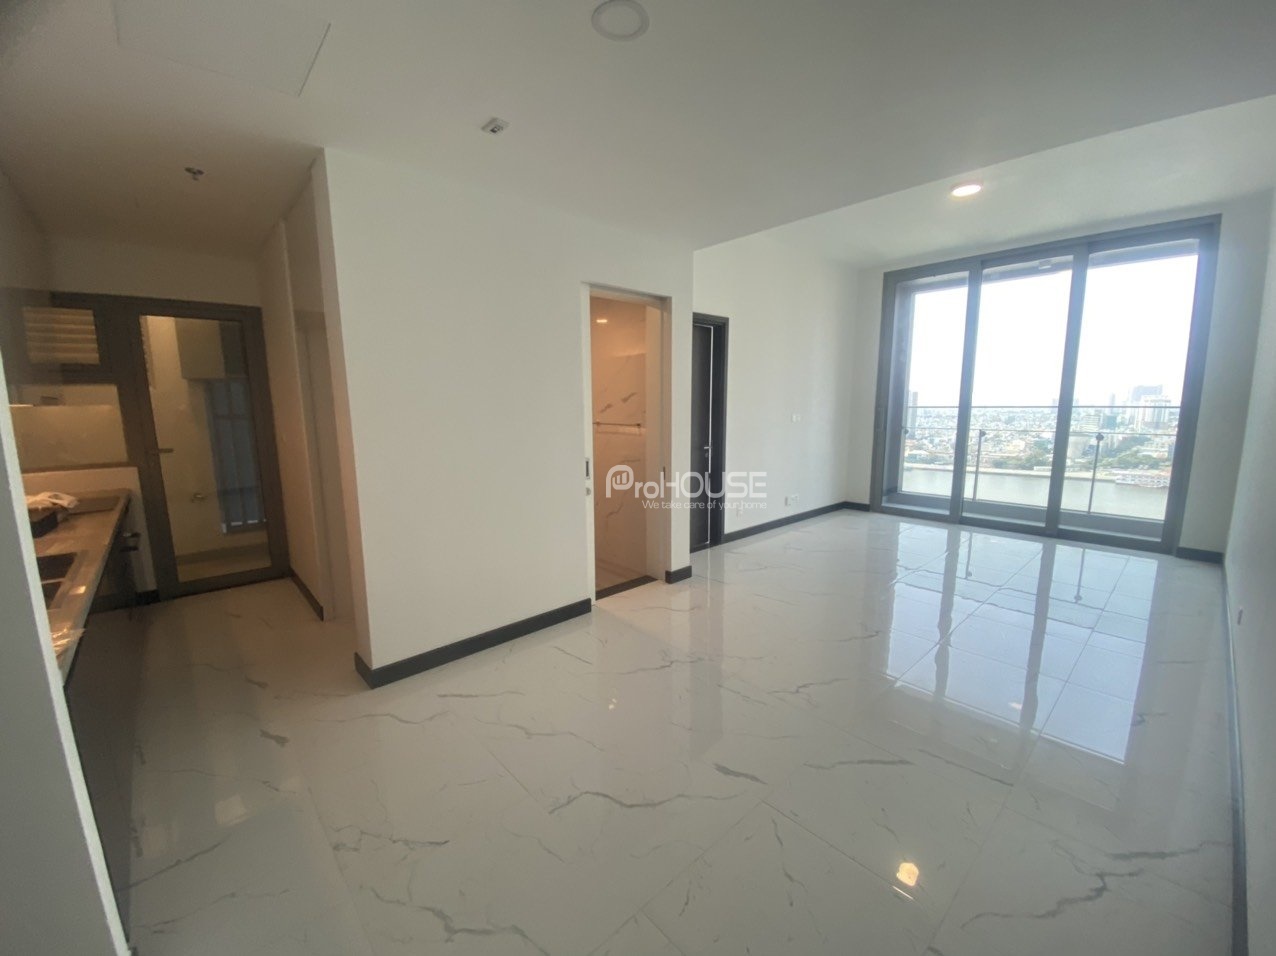 River view 1 bedroom apartment for sale in Empire City with basic furniture